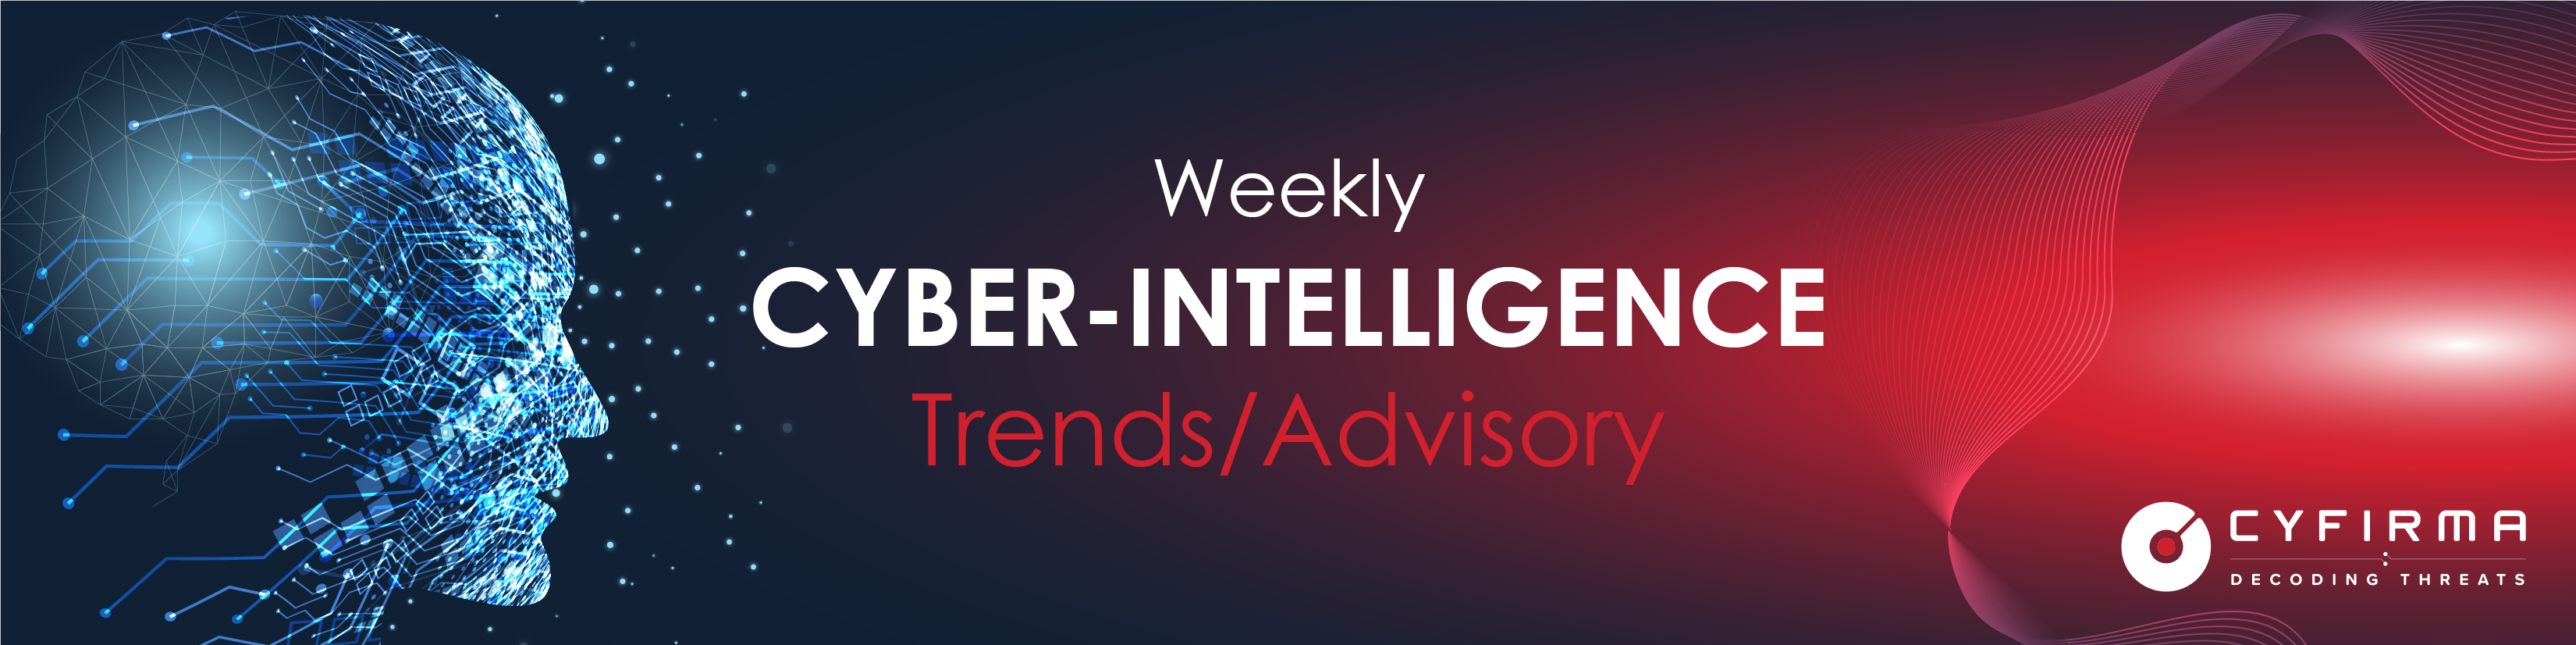 Weekly Intelligence Trends and Advisory | Threat Actor in Focus | Rise in Malware, Ransomware, Phishing | Vulnerability and Exploits – 16 Jan 2022